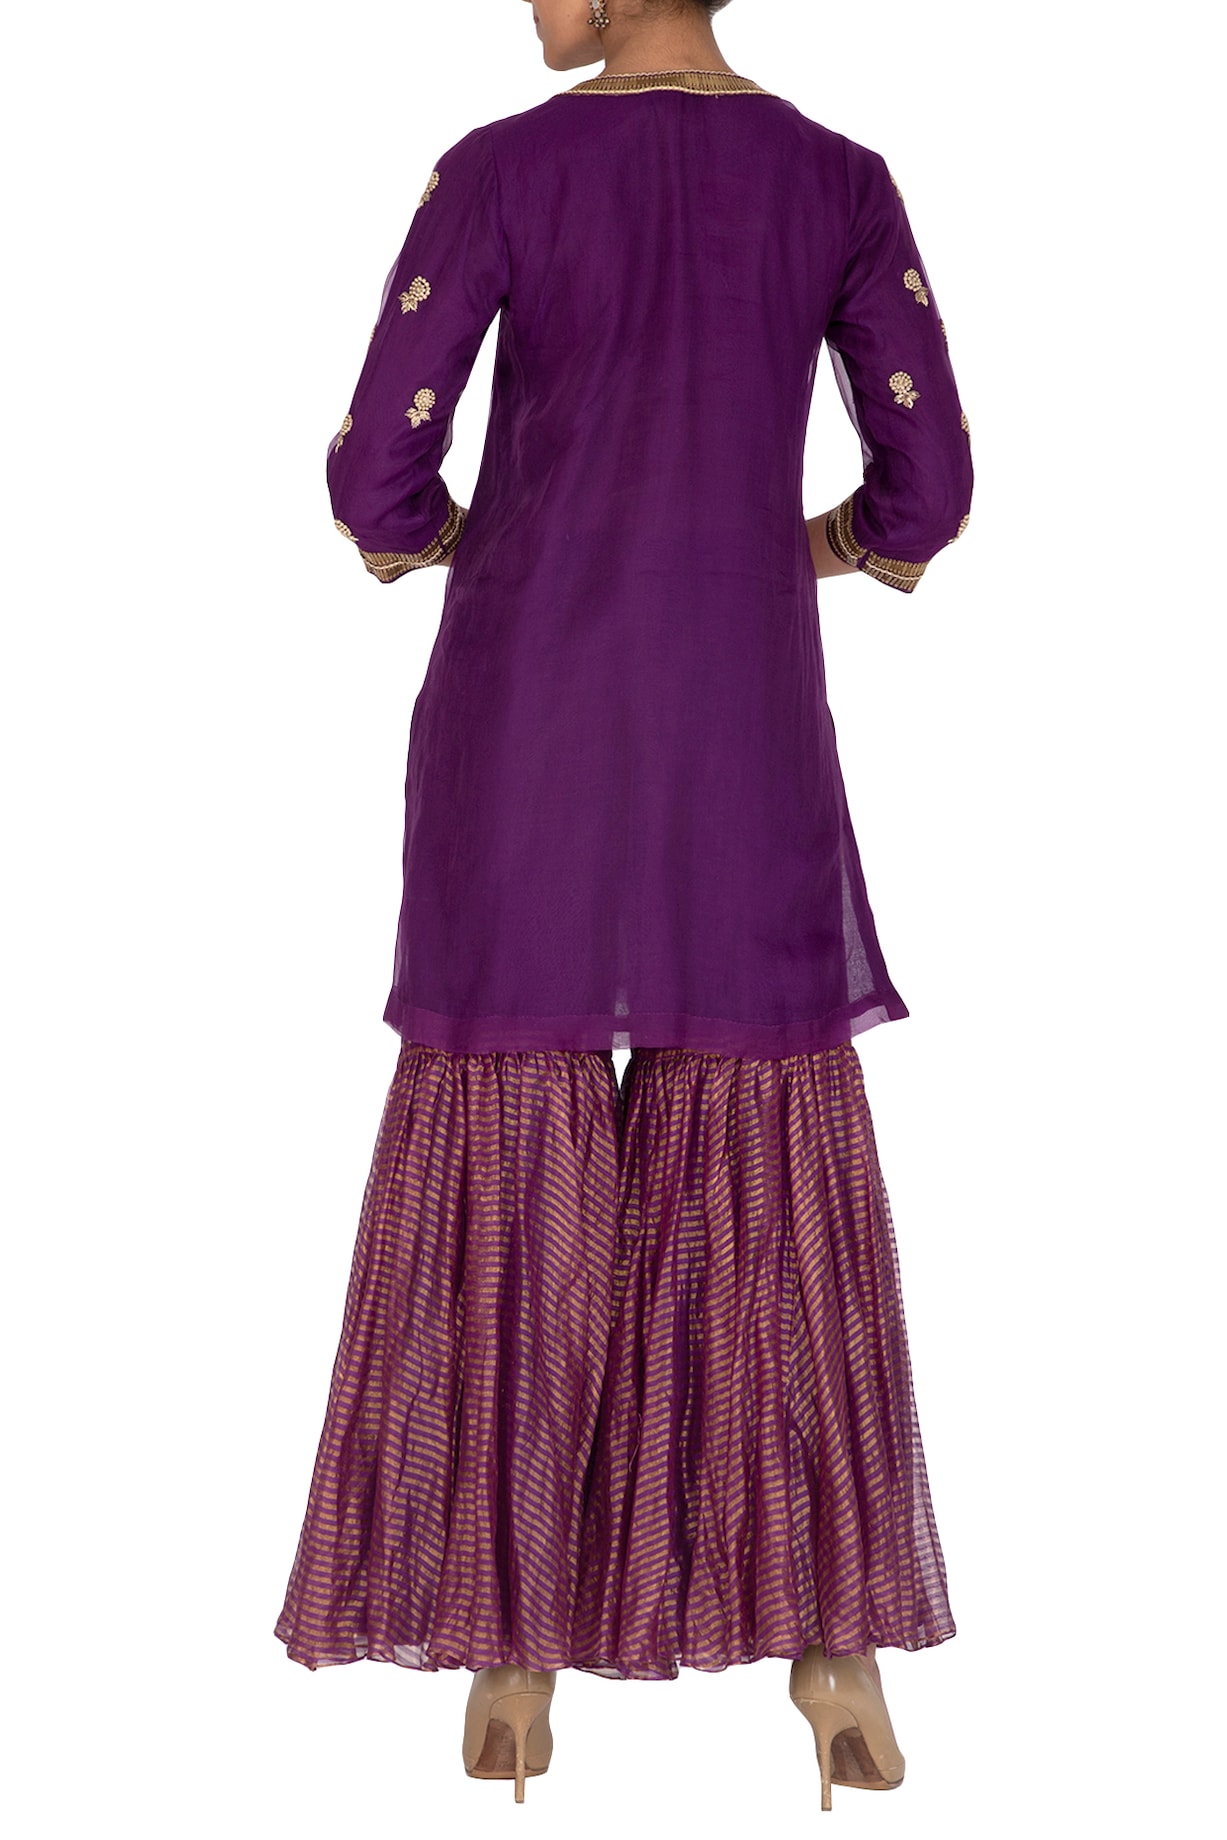 Purple Embroidered Gharara Set Design by Kunza at Pernia's Pop Up Shop 2024